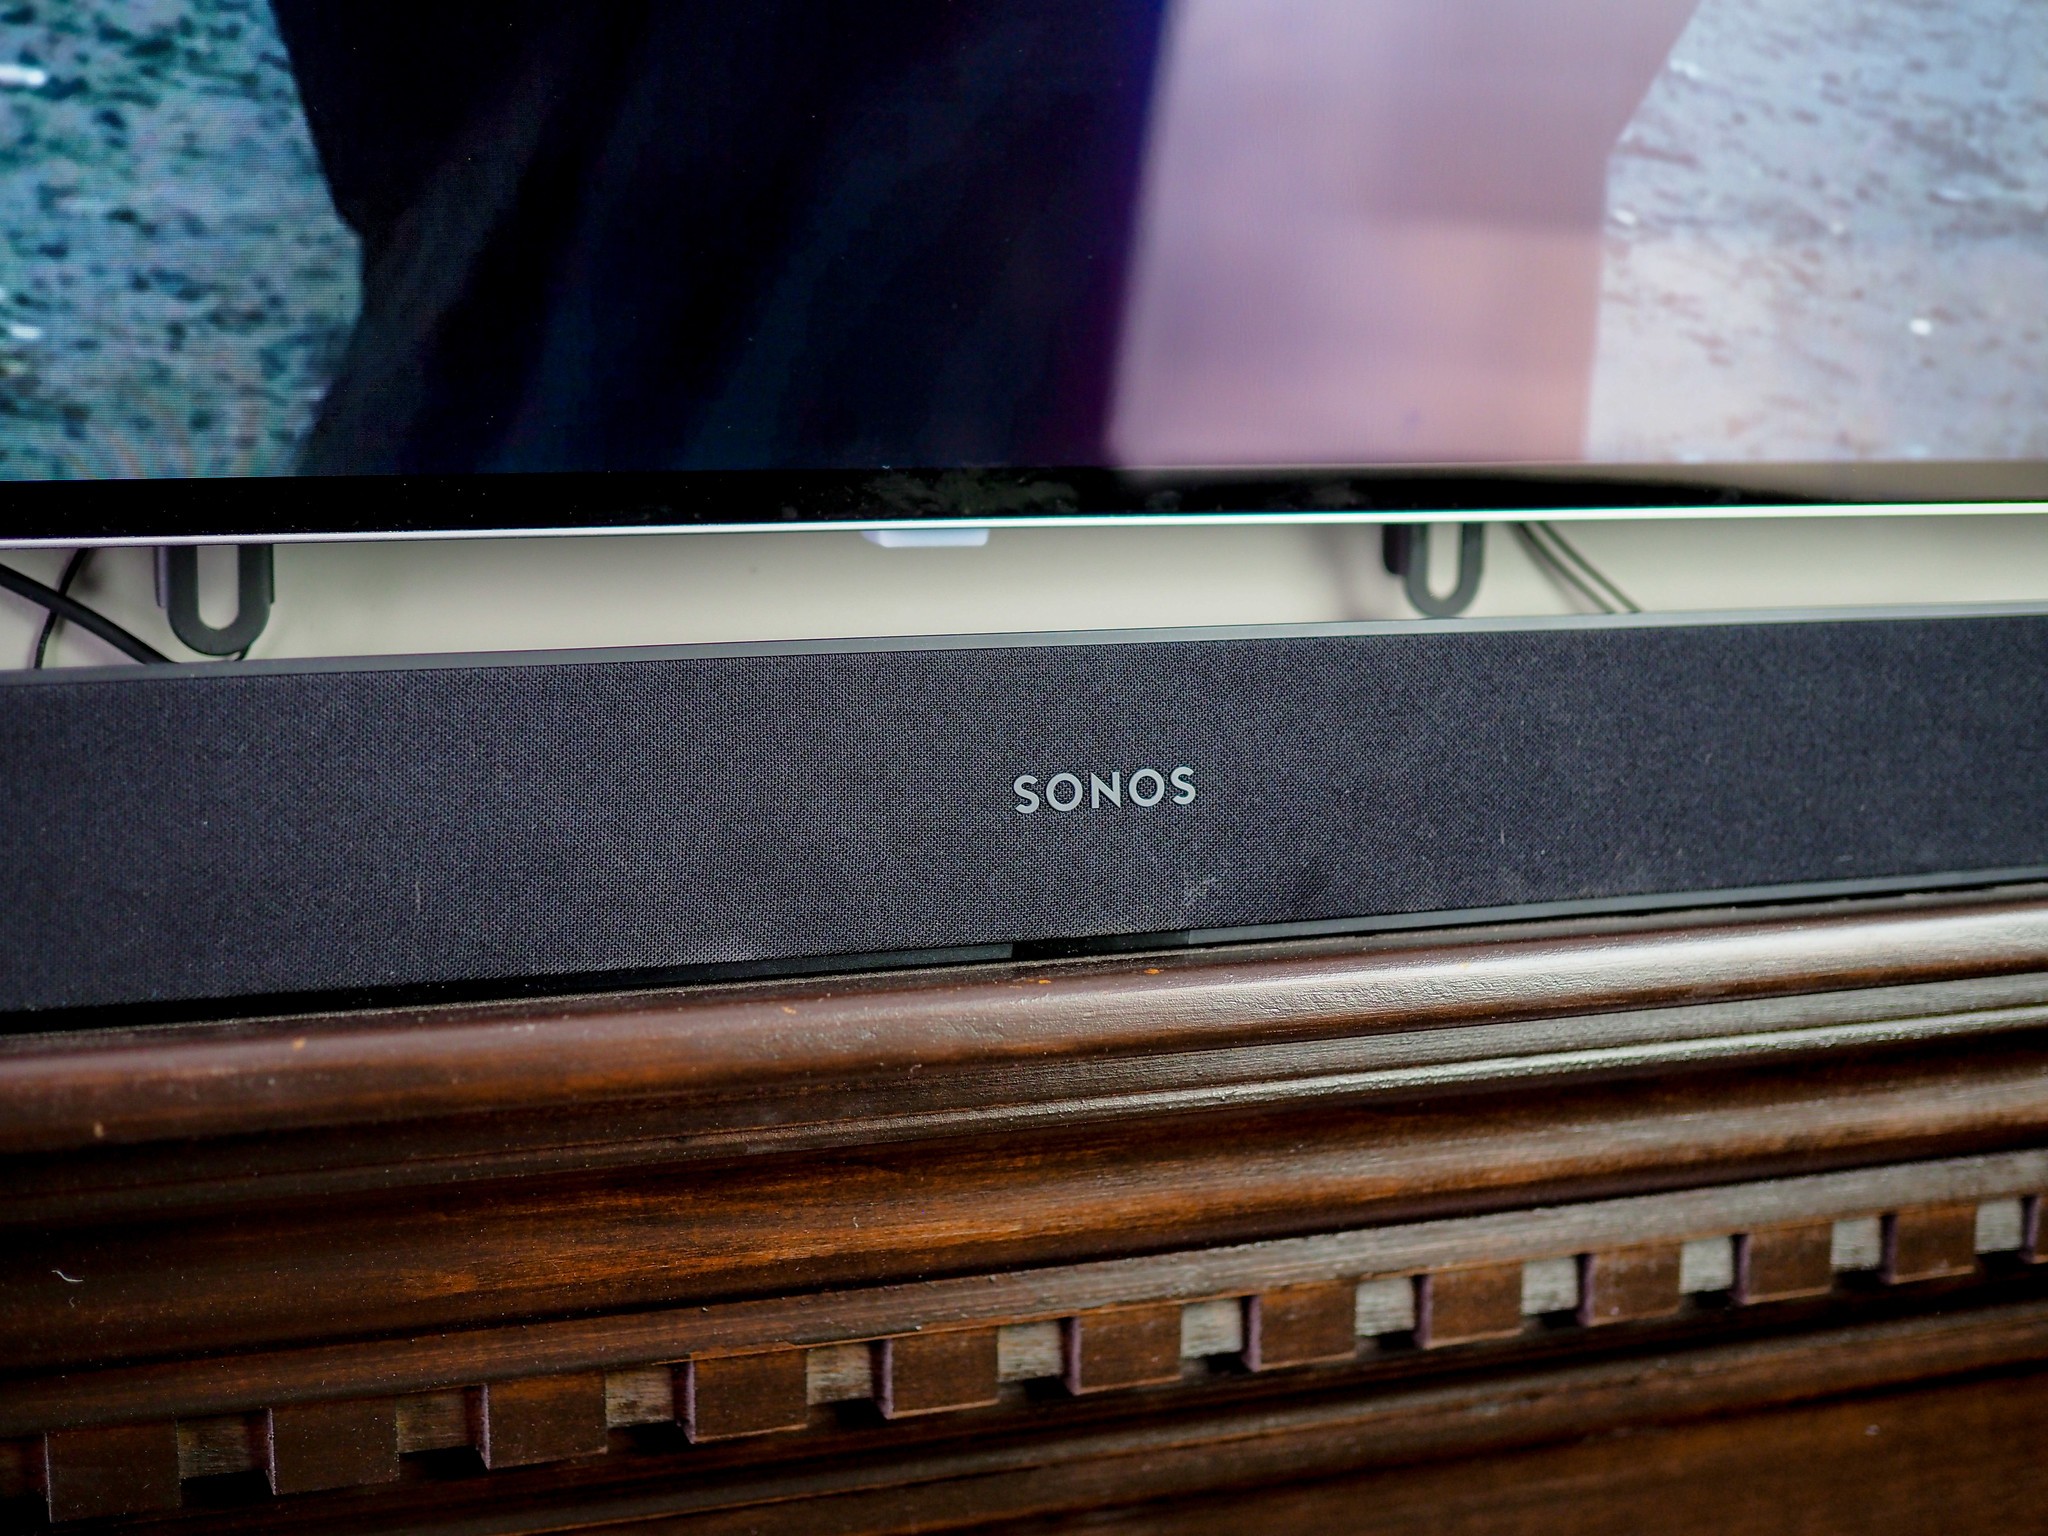 Total Flock Happening What hookups do you need to connect a Sonos Beam to your TV? | iMore